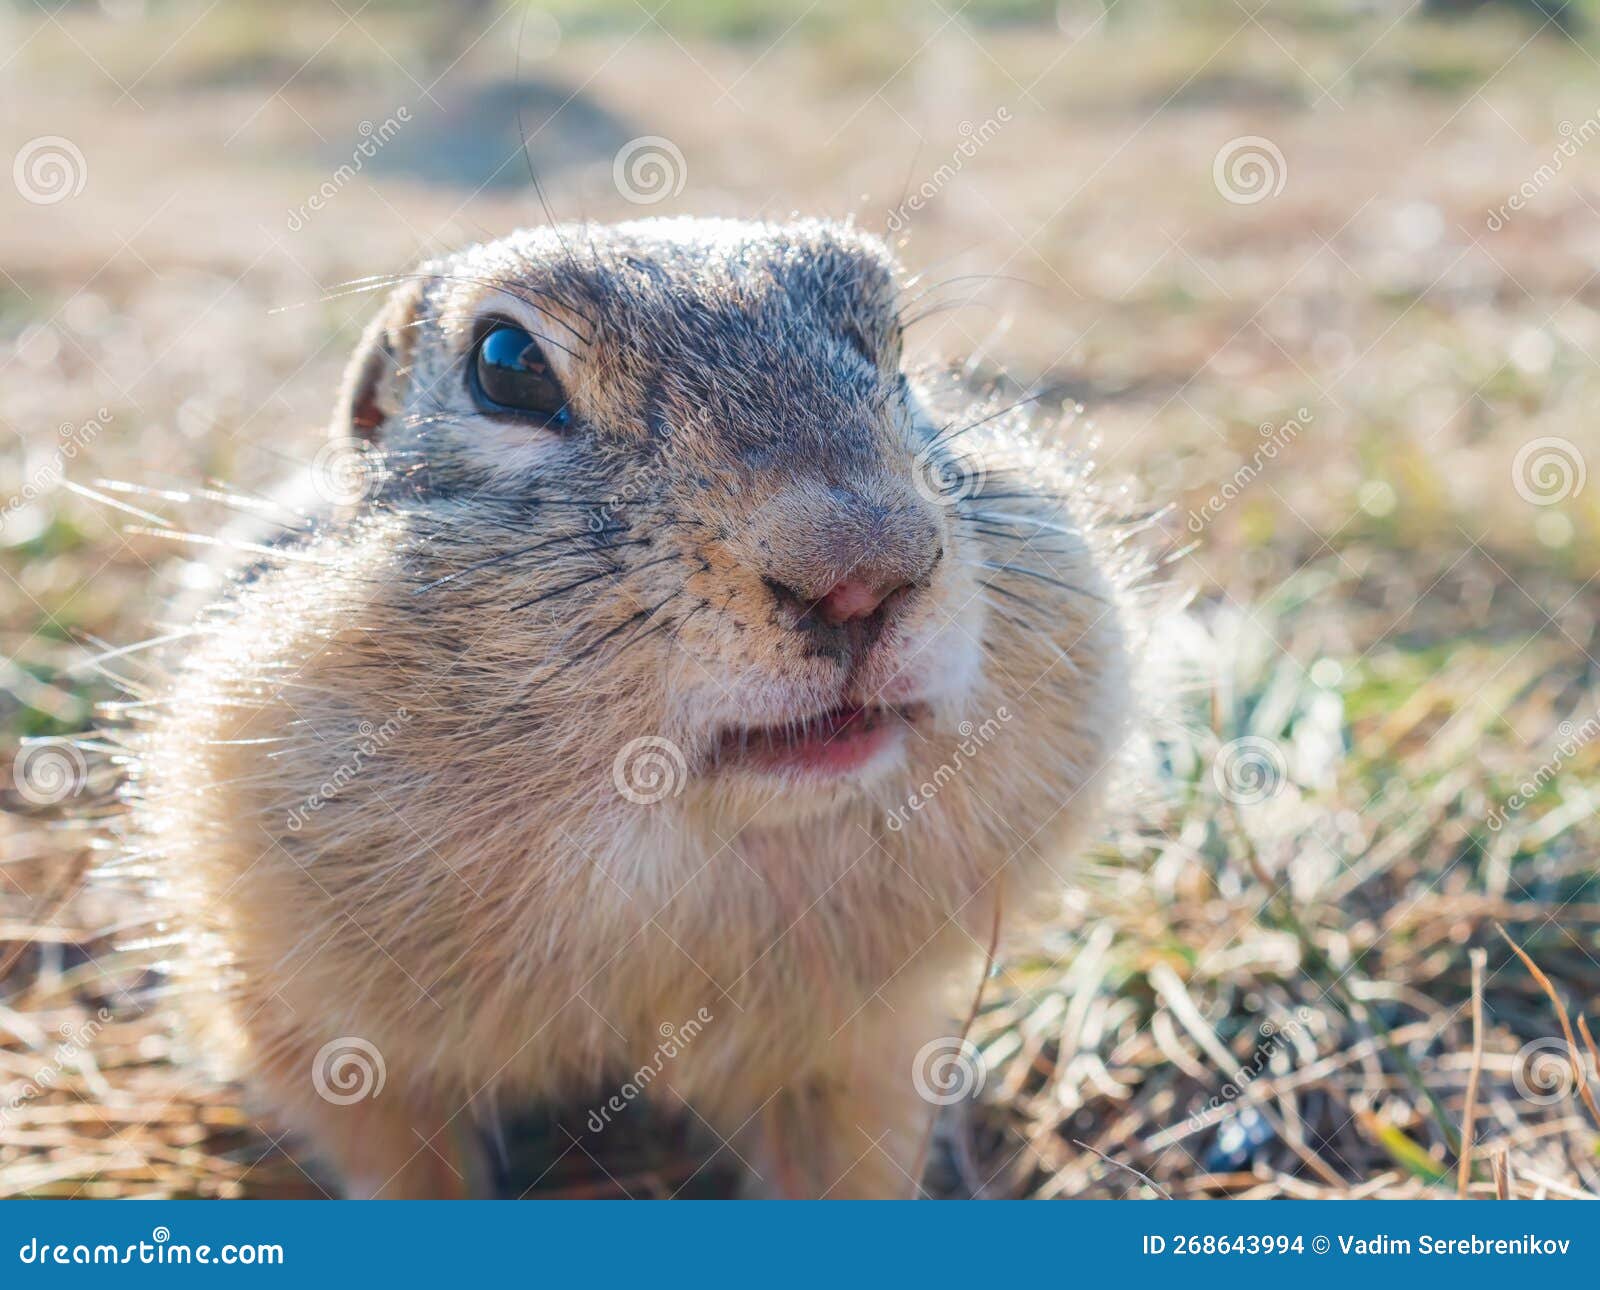 a gopher is looking at camer in a grassy meadow. close-up